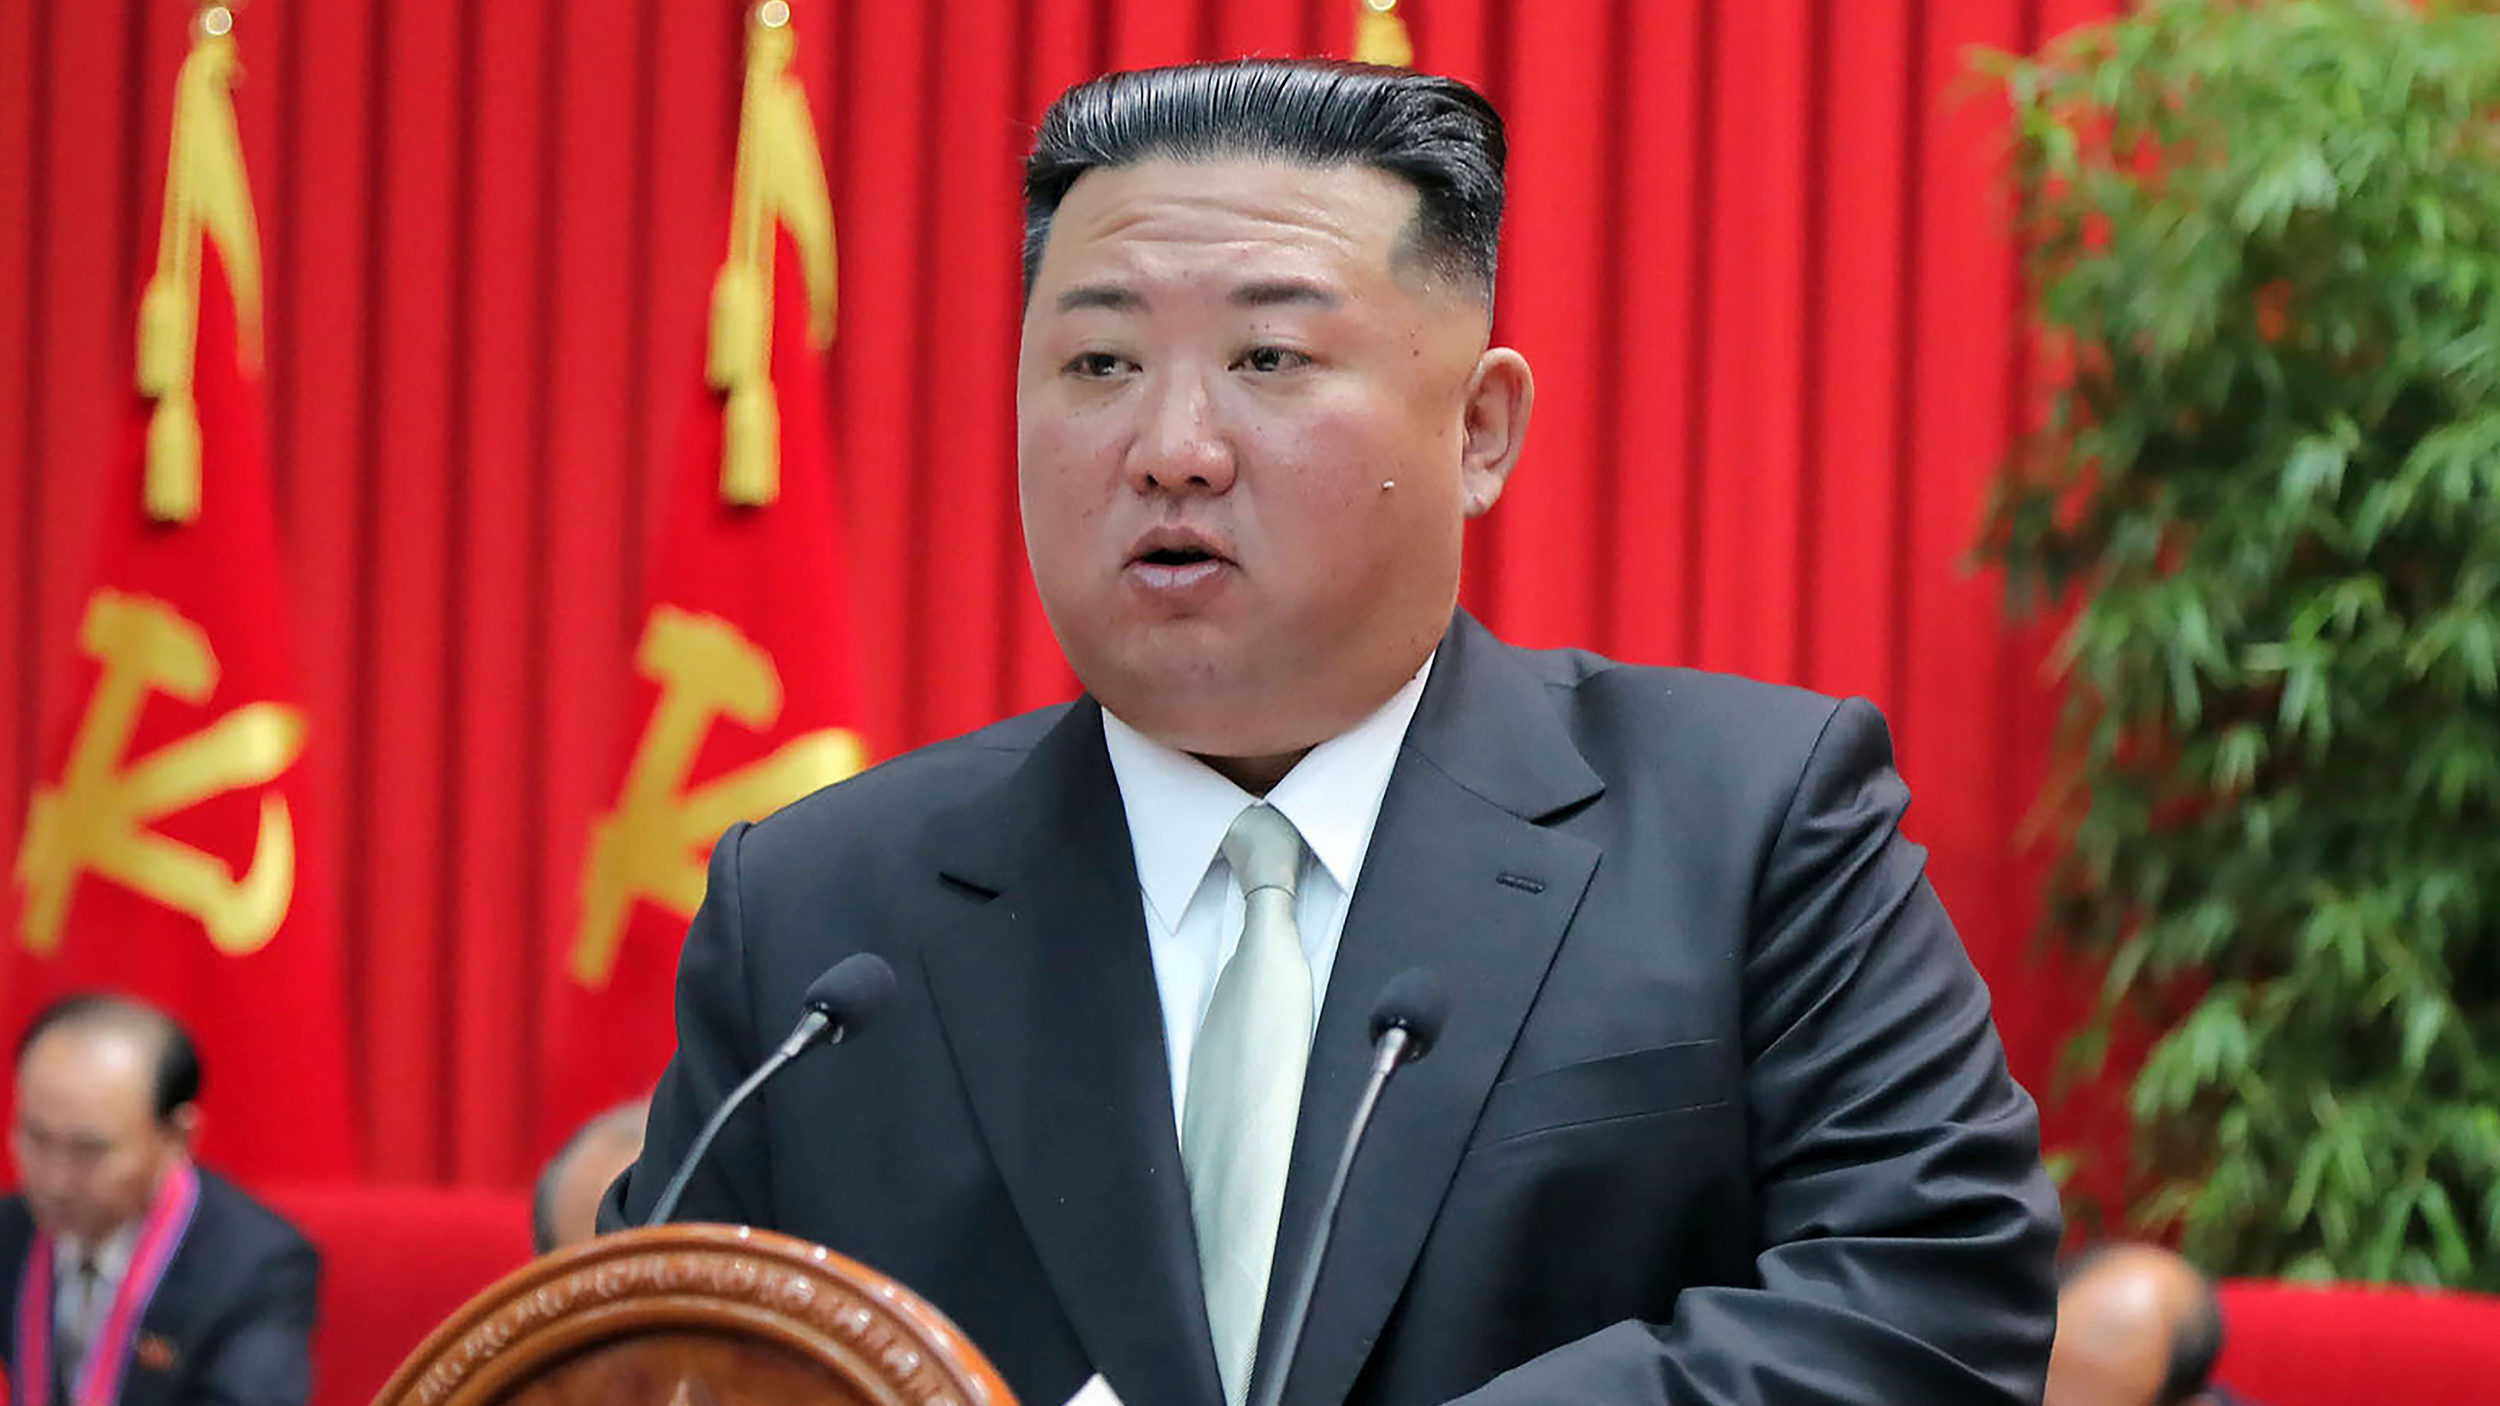 North Korea launched a suspected intercontinental ballistic missile (ICBM) on November 18. North Ko...